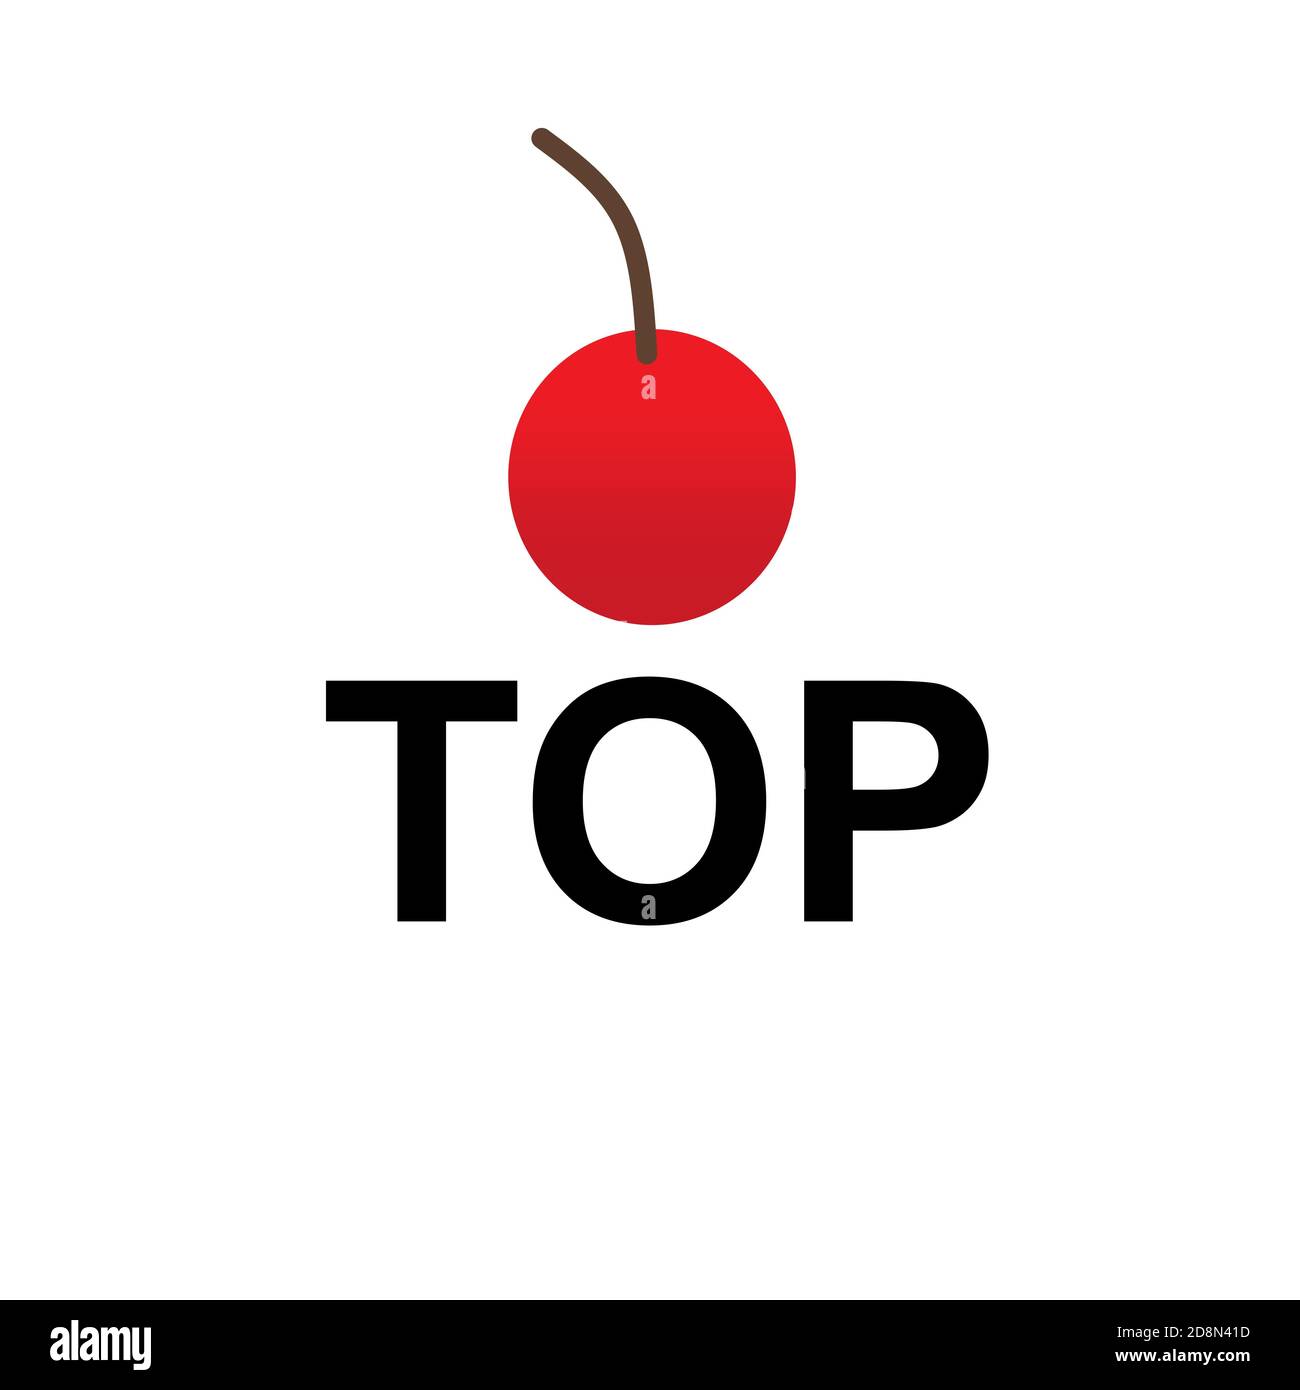 Illustration of the saying Cherry on Top Stock Photo